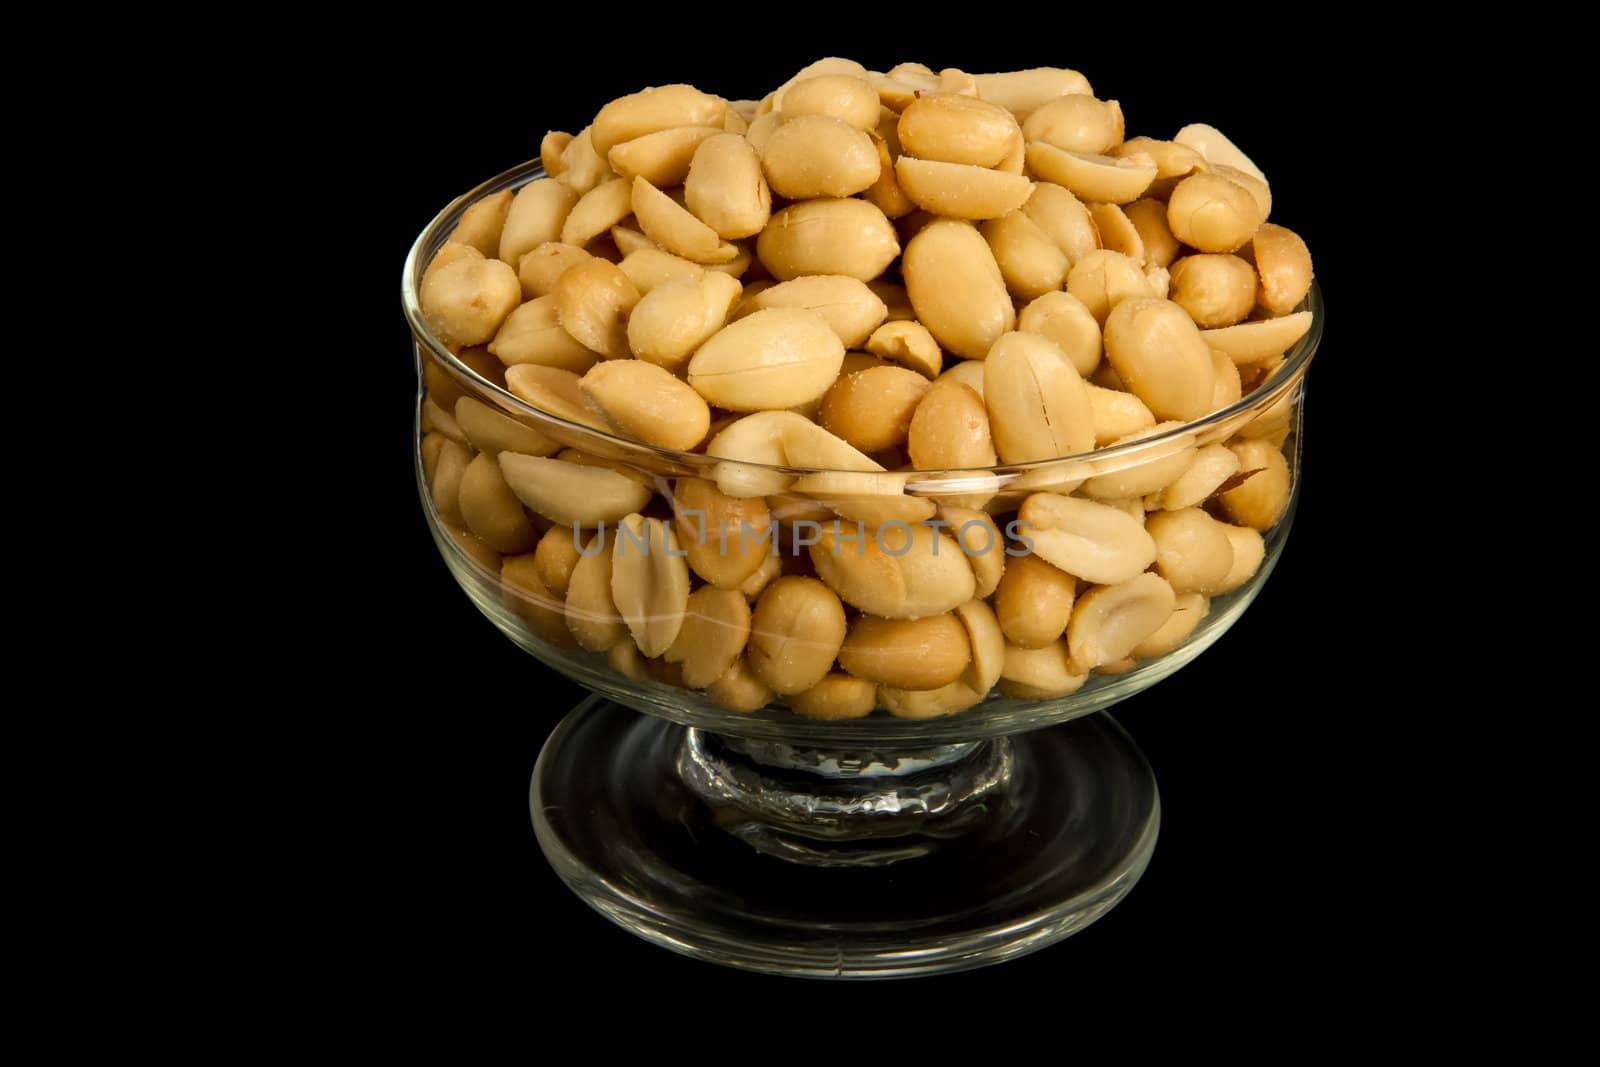 peanuts in a bowl by Stootsy